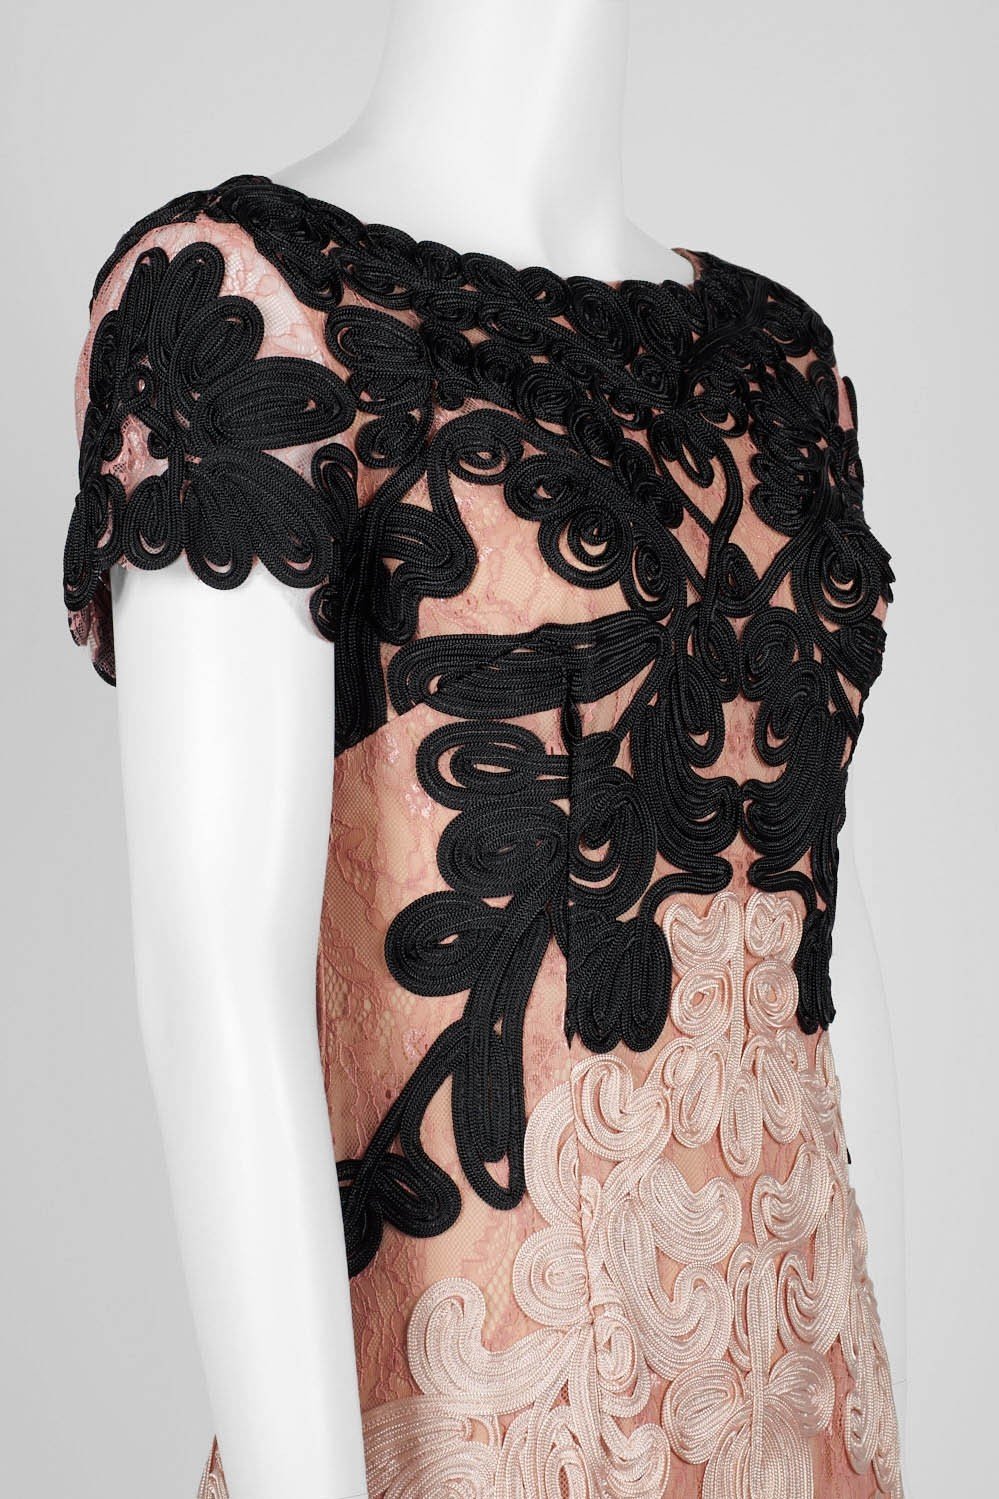 JS Collections - 865626 Short Sleeve Embroidered Soutache Lace Dress In Black and Pink